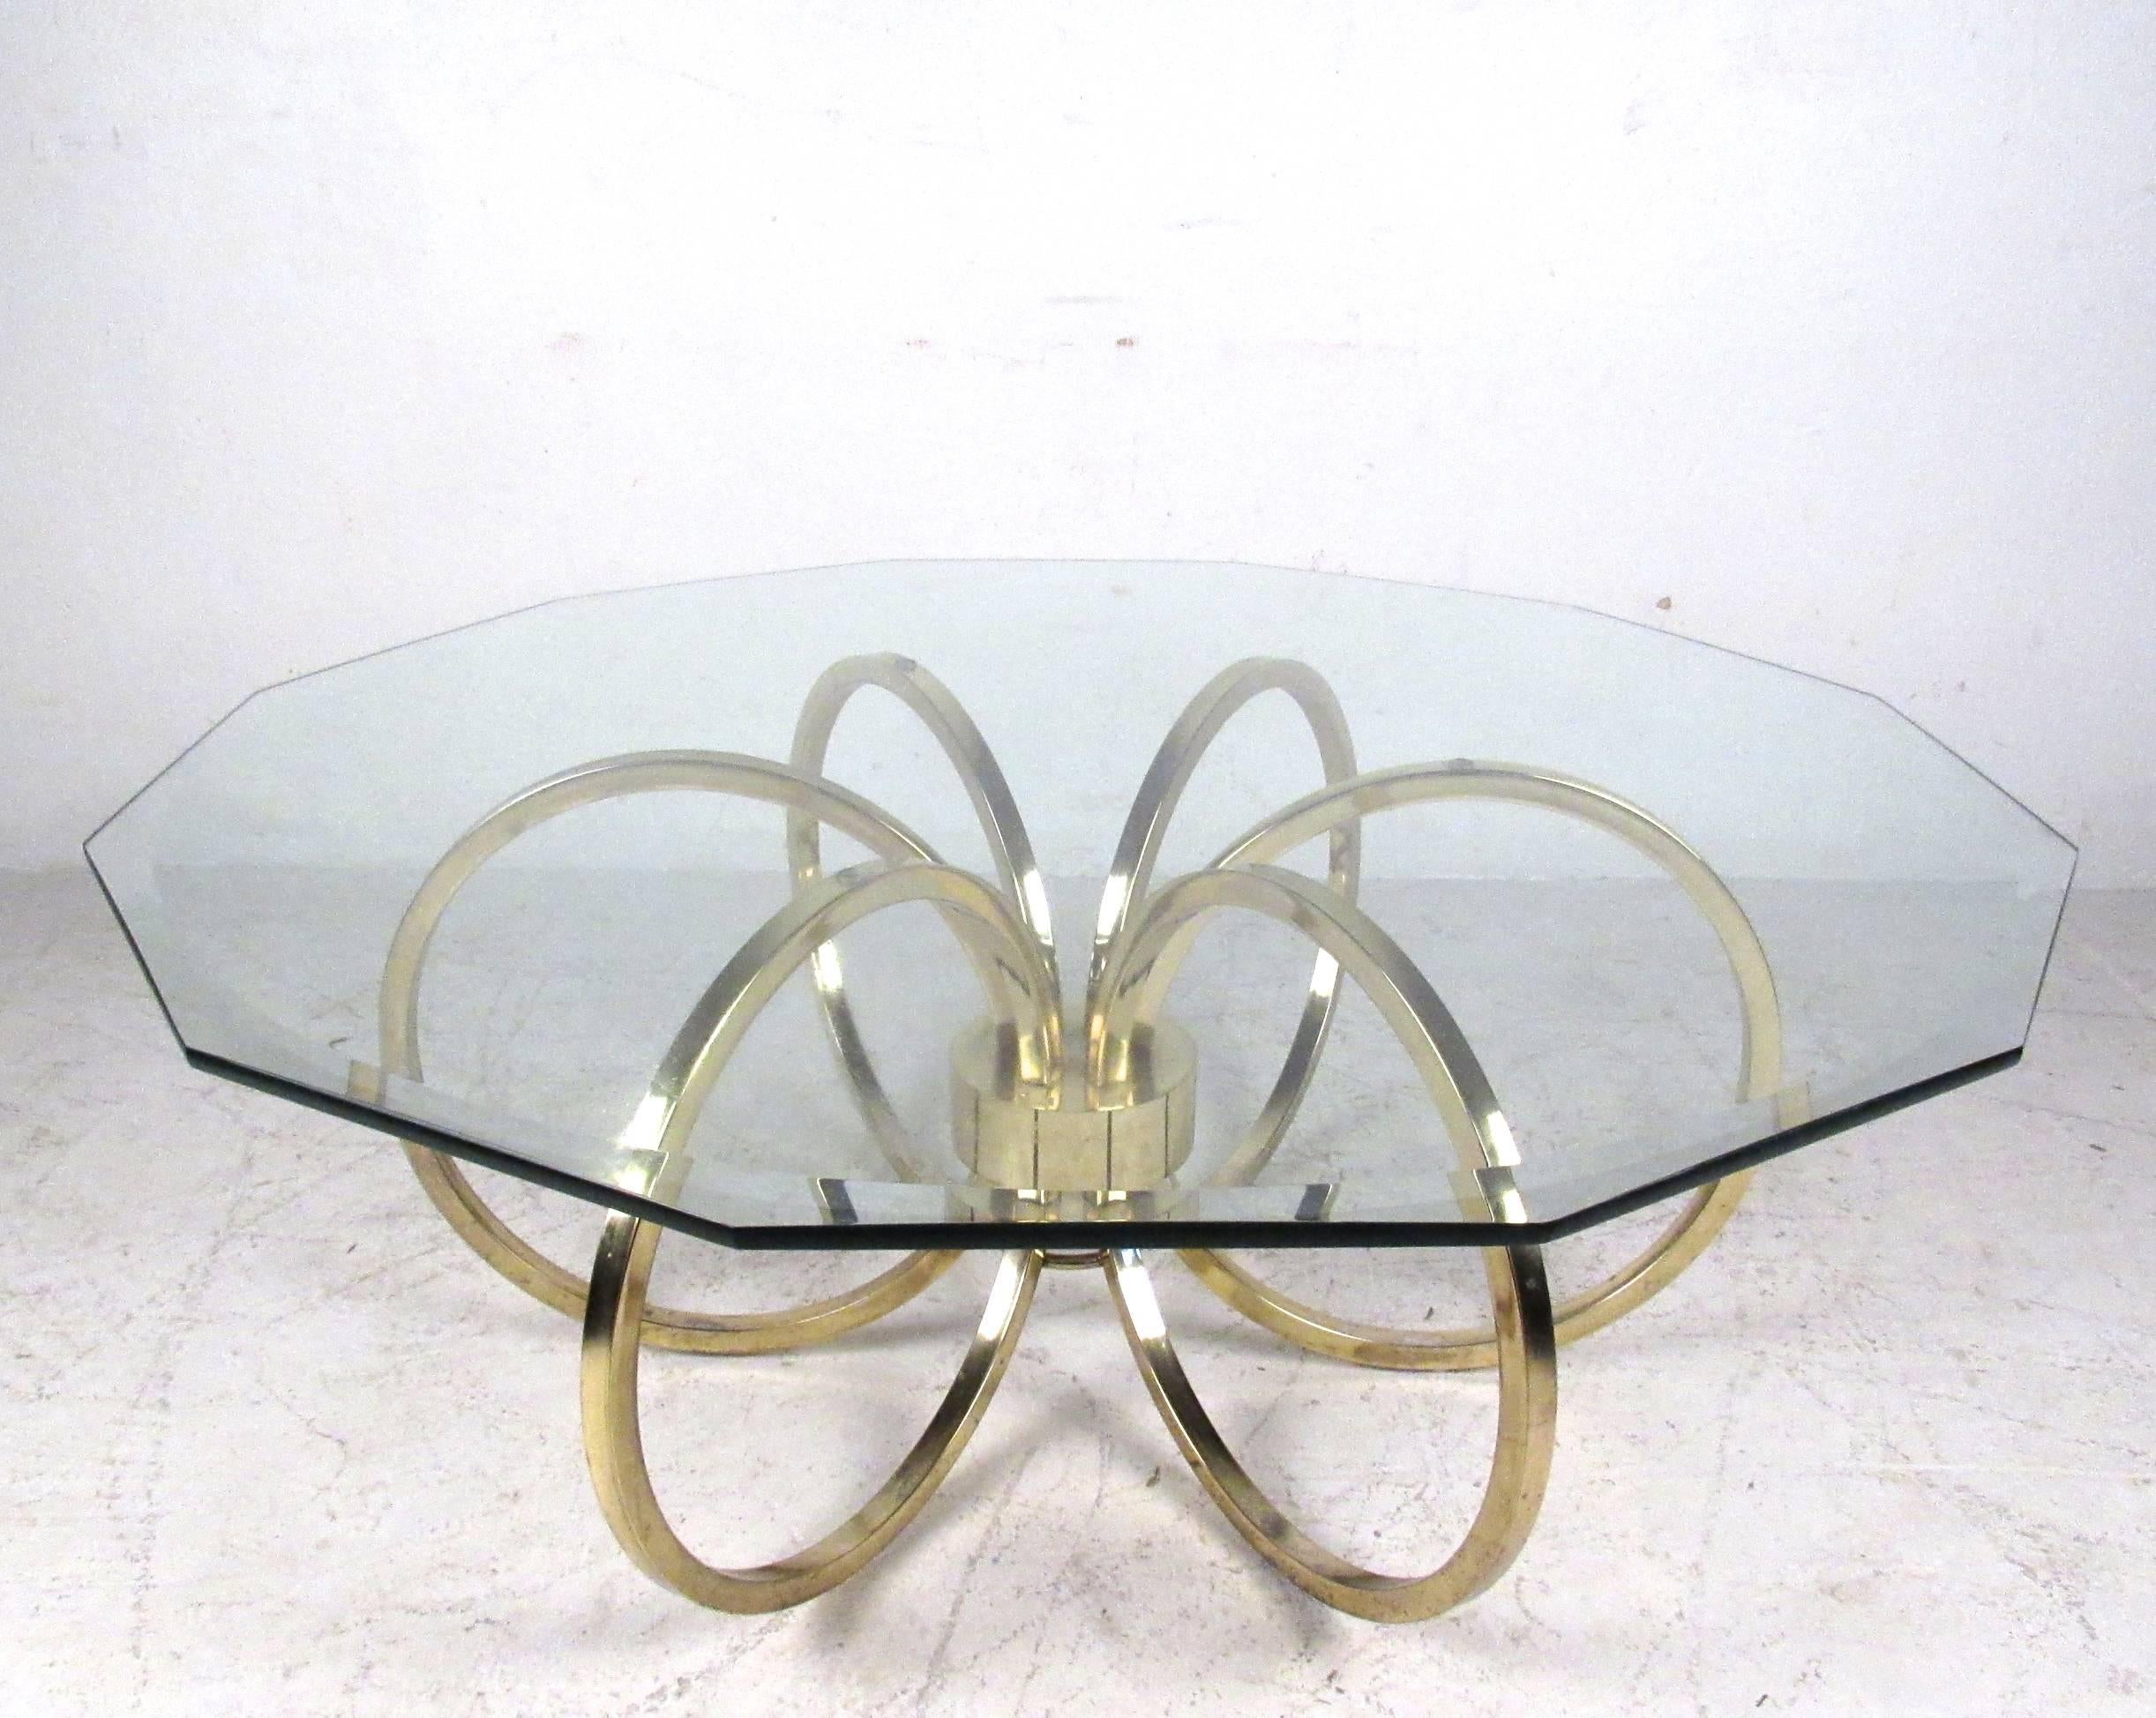 This decorative brass finish coffee table features an octagonal bevelled glass top on sturdy and ornate metal base. Unique style adds elegant vintage flare to any interior. Please confirm item location (NY or NJ).